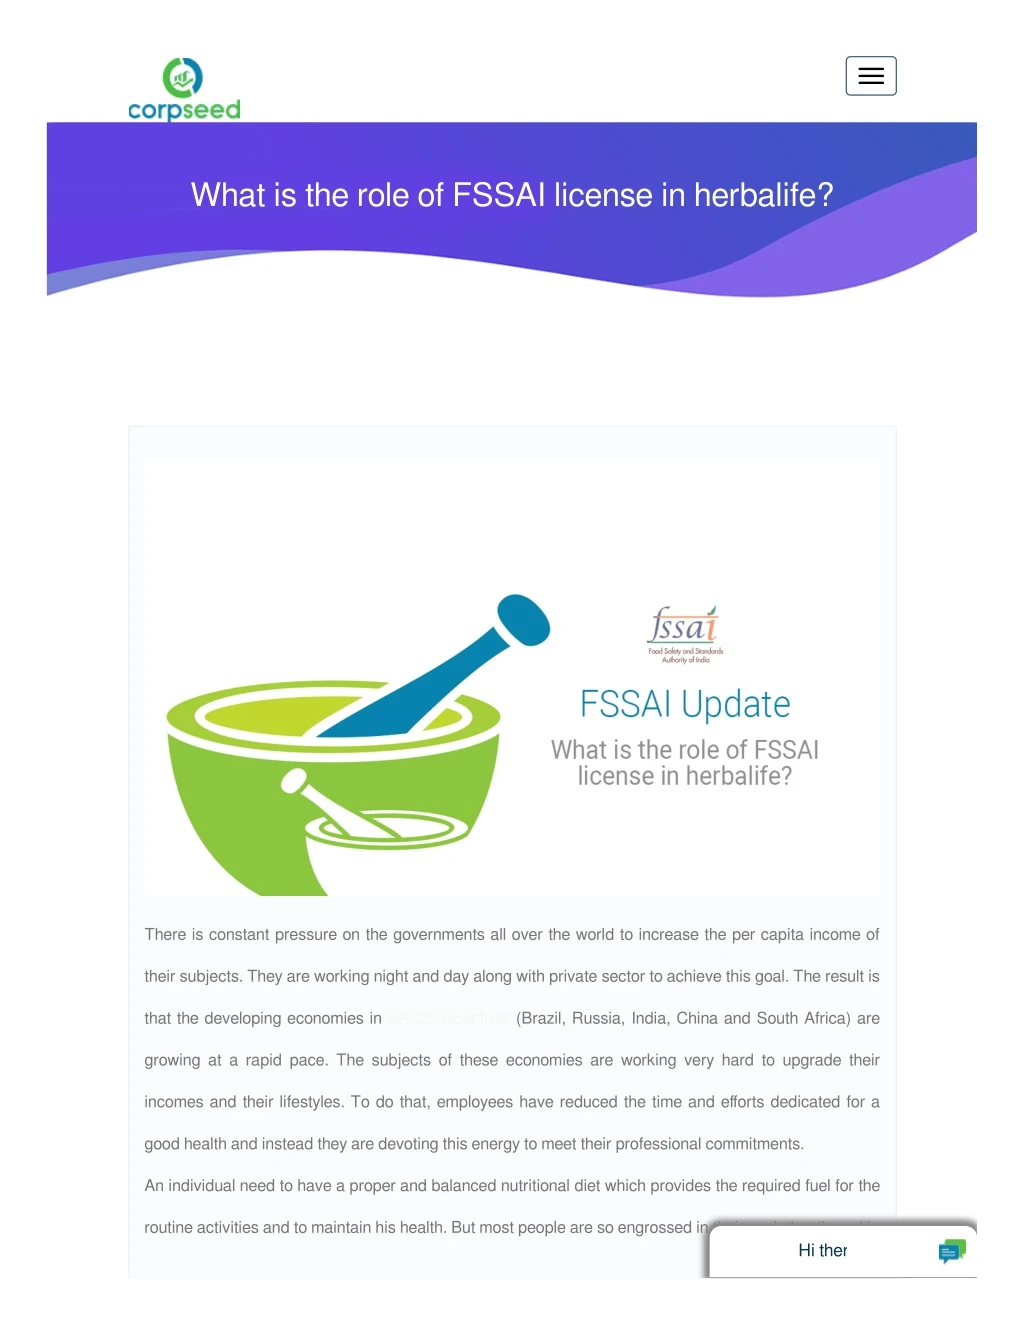 what is the role of fssai license in herbalife